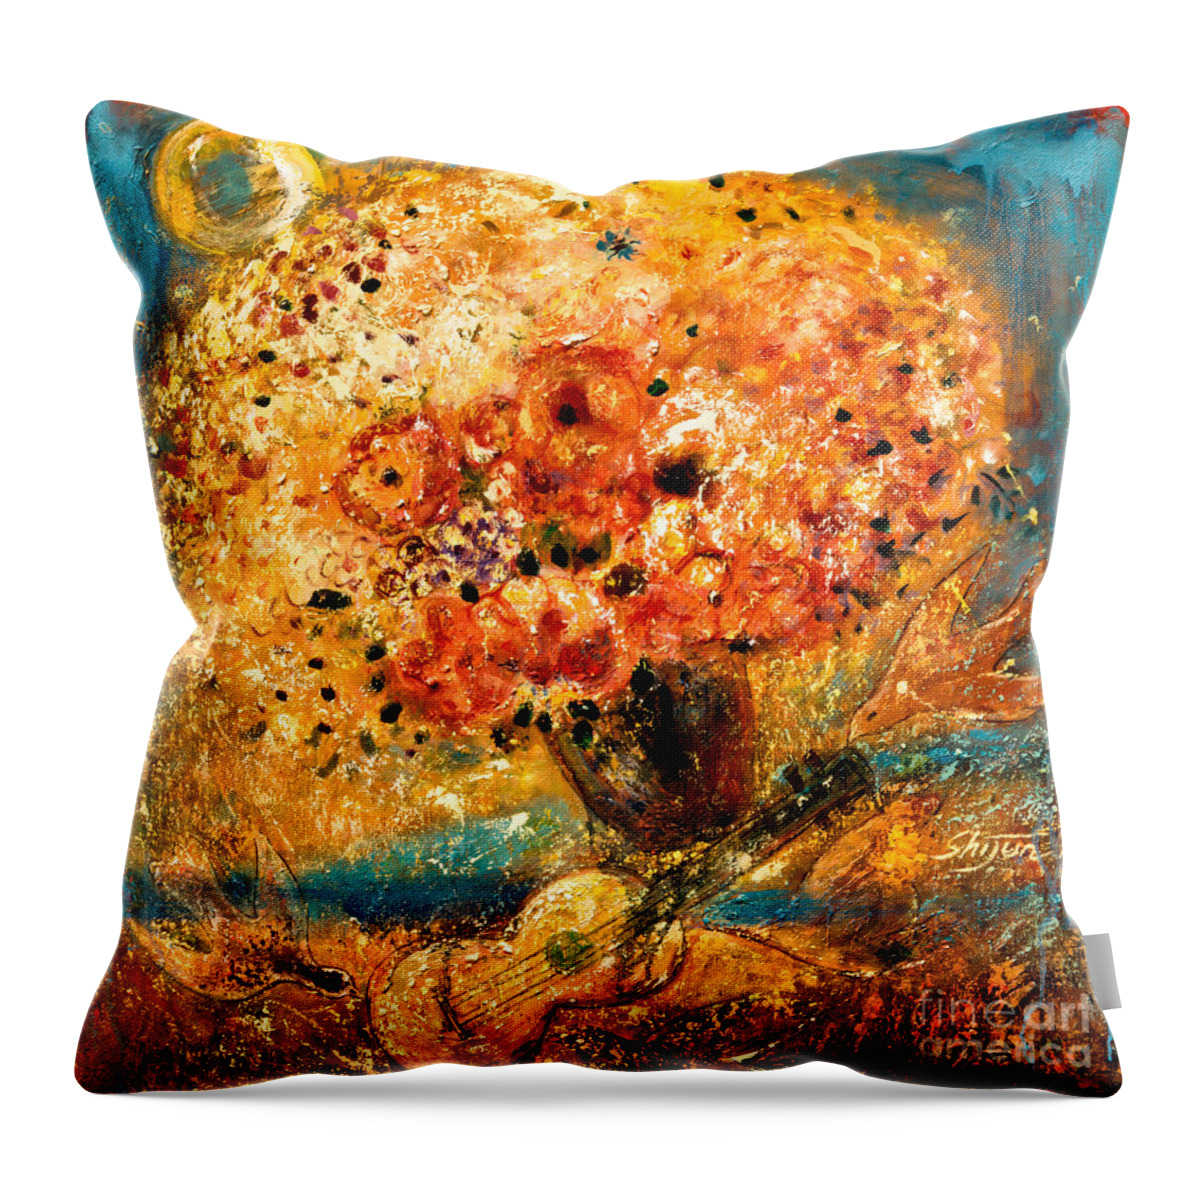  Throw Pillow featuring the painting Celebration III by Shijun Munns